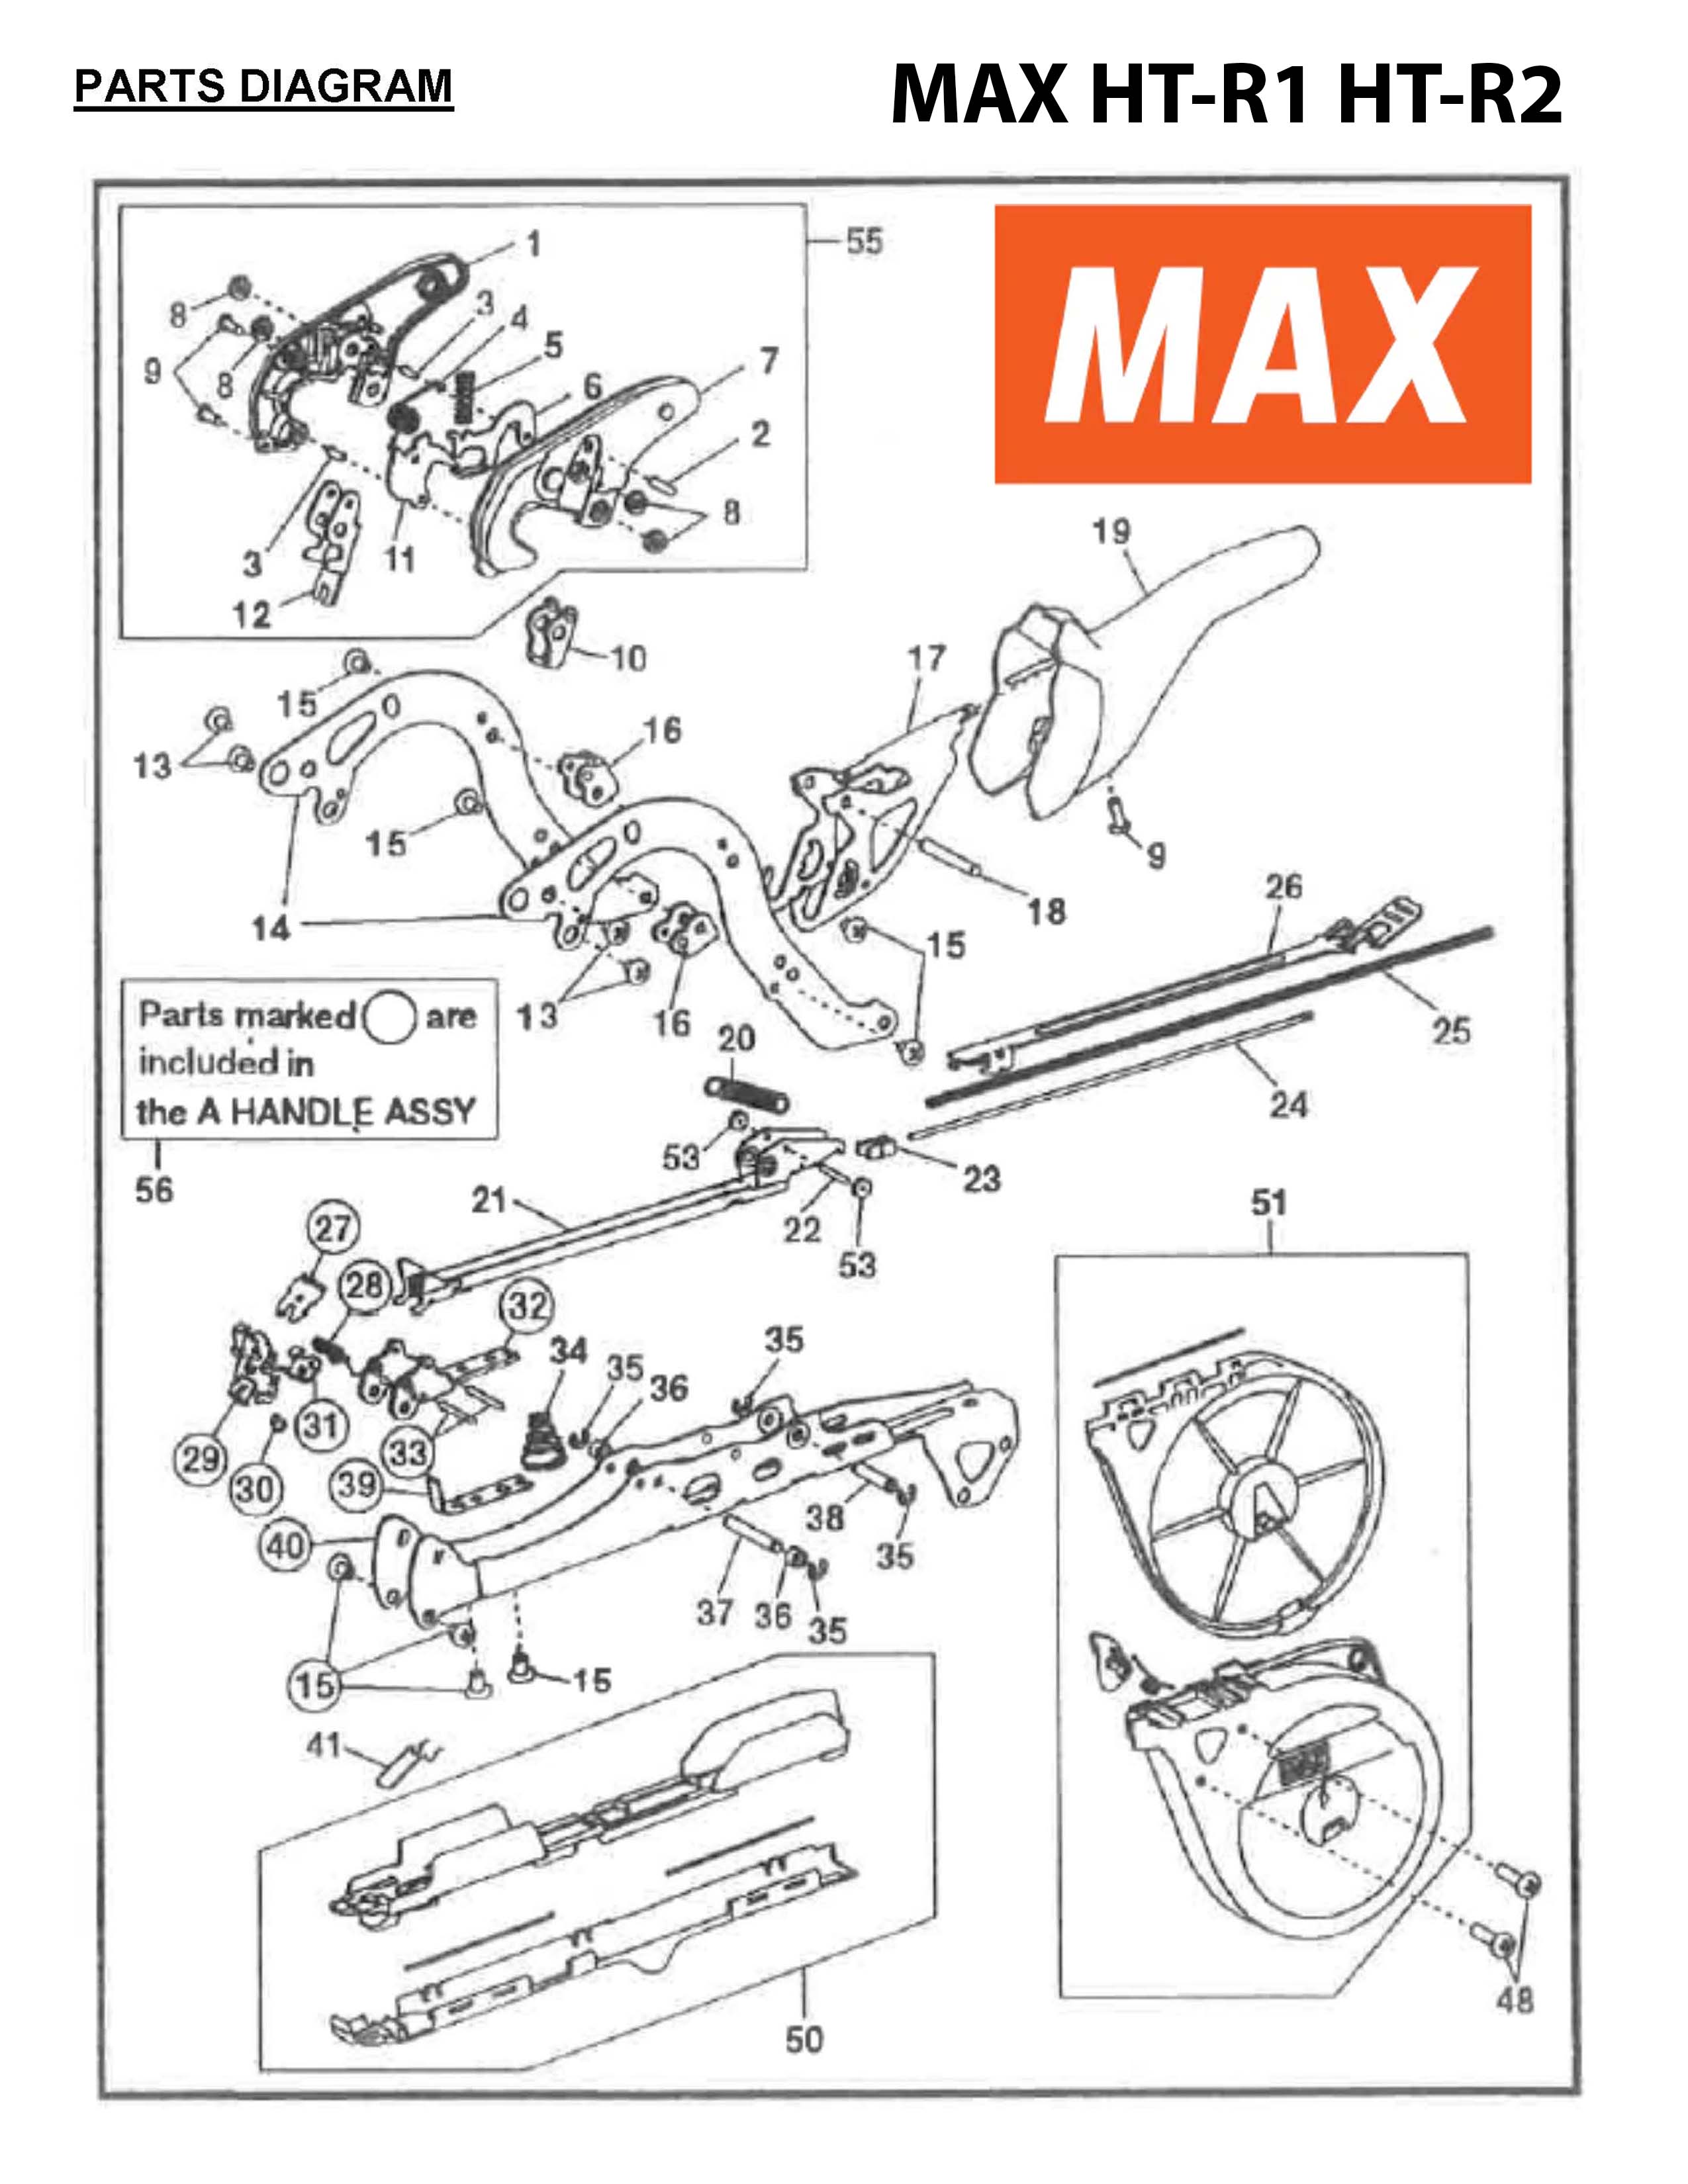 MAX Tapener Part HT70071 A HANDLE ASSY Fits MAX HT-R1 HT-R2 #56